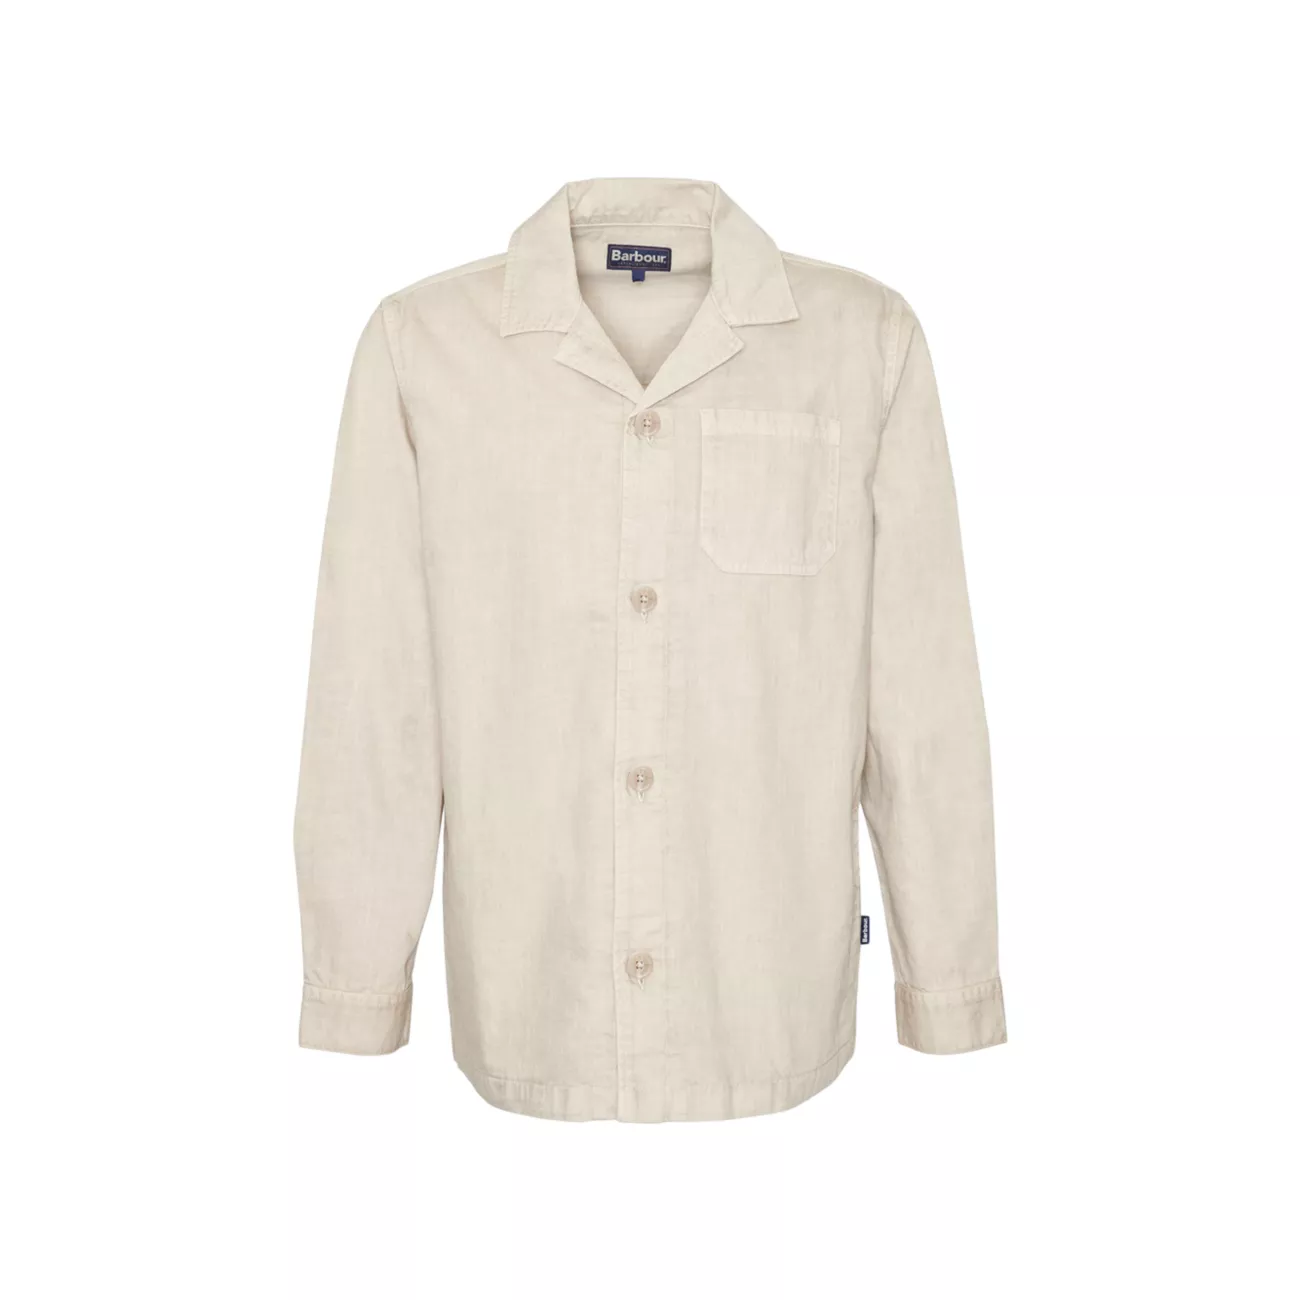 Melonby Cotton-Blend Overshirt Barbour